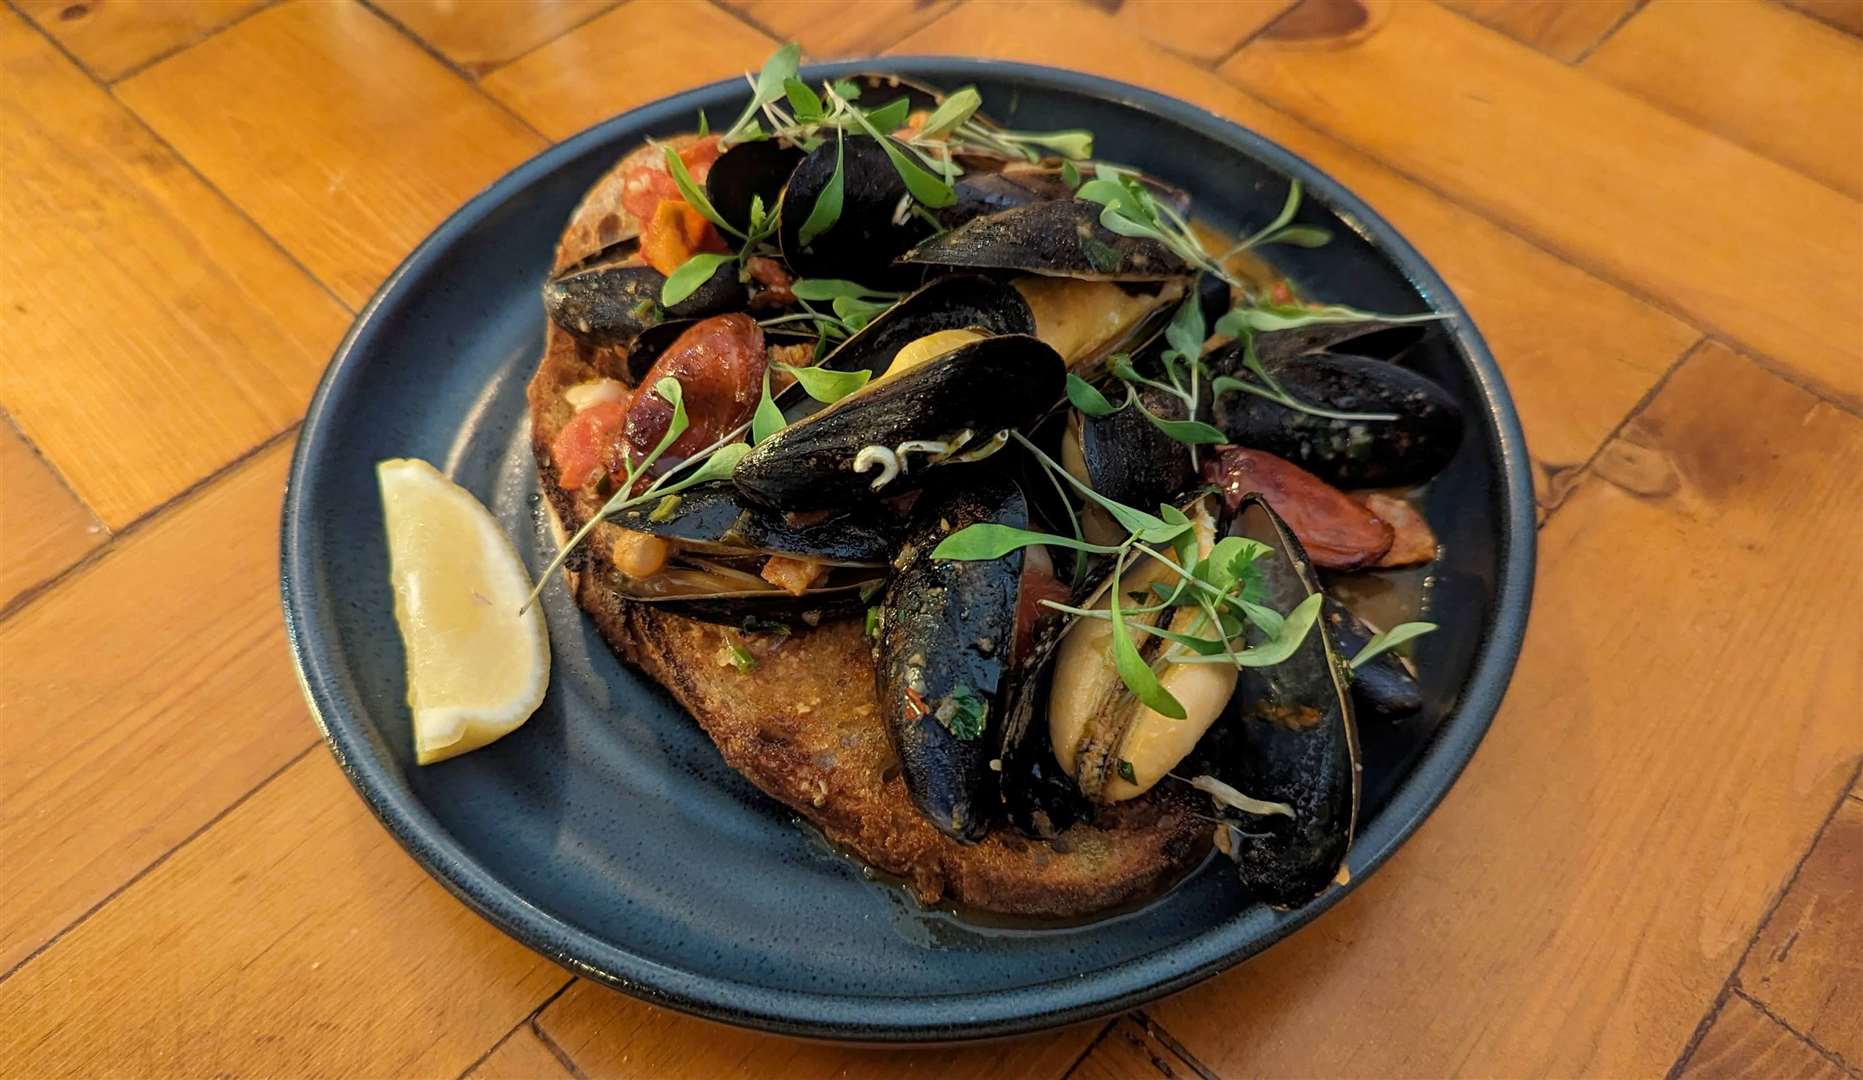 Mussels, butter beans and chorizo on toast